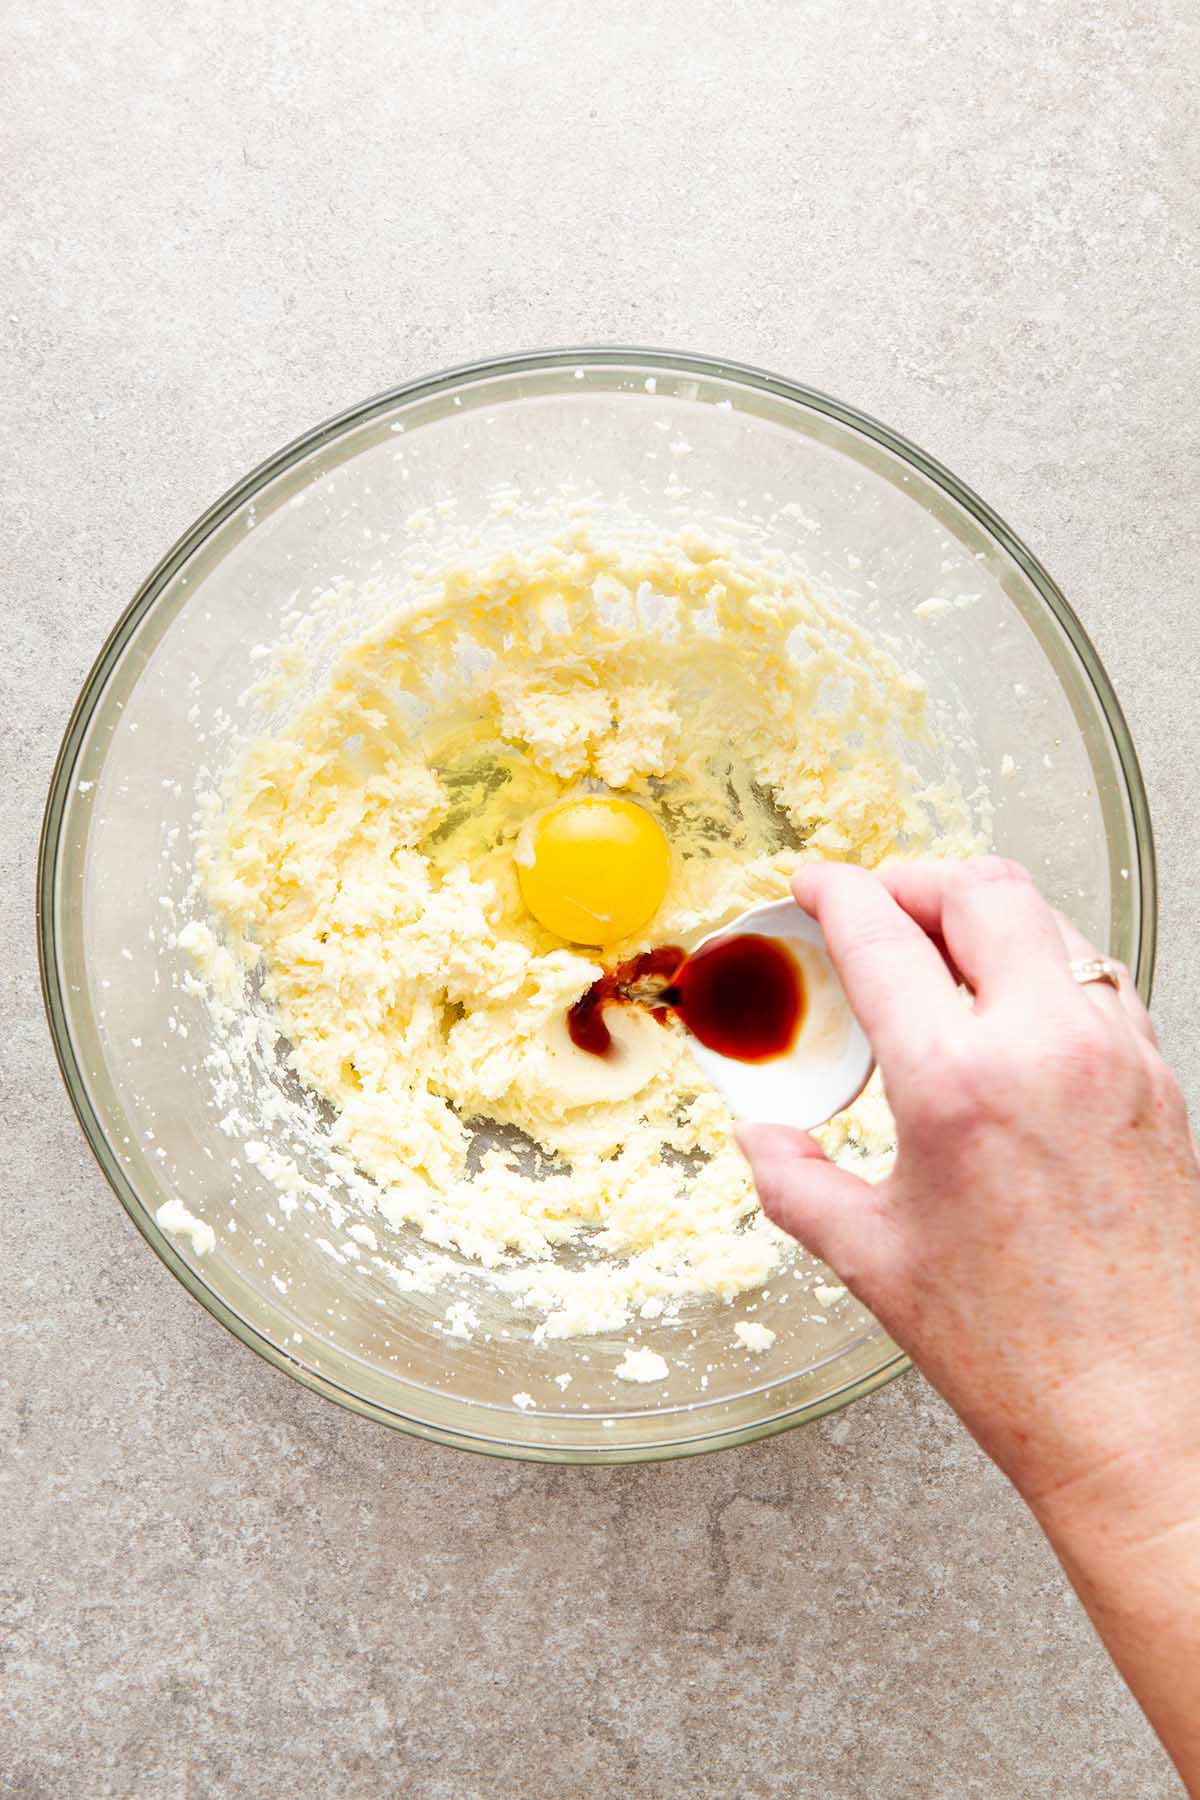 A hand pouring vanilla extract from a small bowl into a large glass bowl of creamed butter and egg.